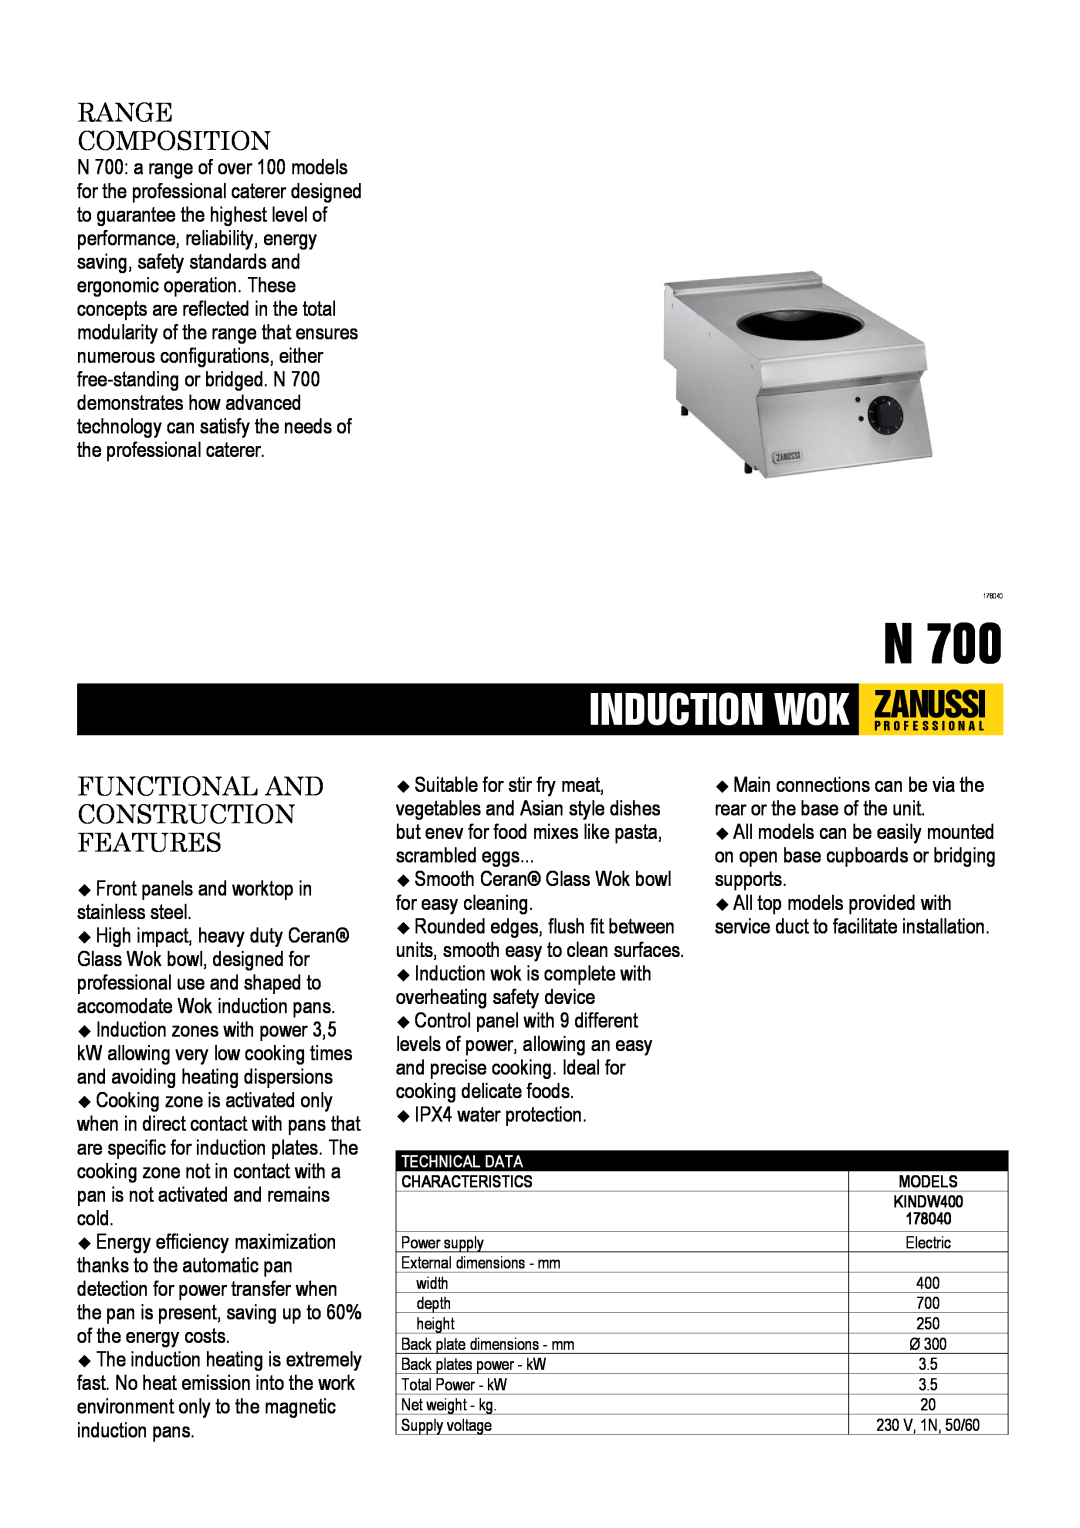 Zanussi KINDW400, 178040 dimensions Range Composition, Functional And Construction Features 